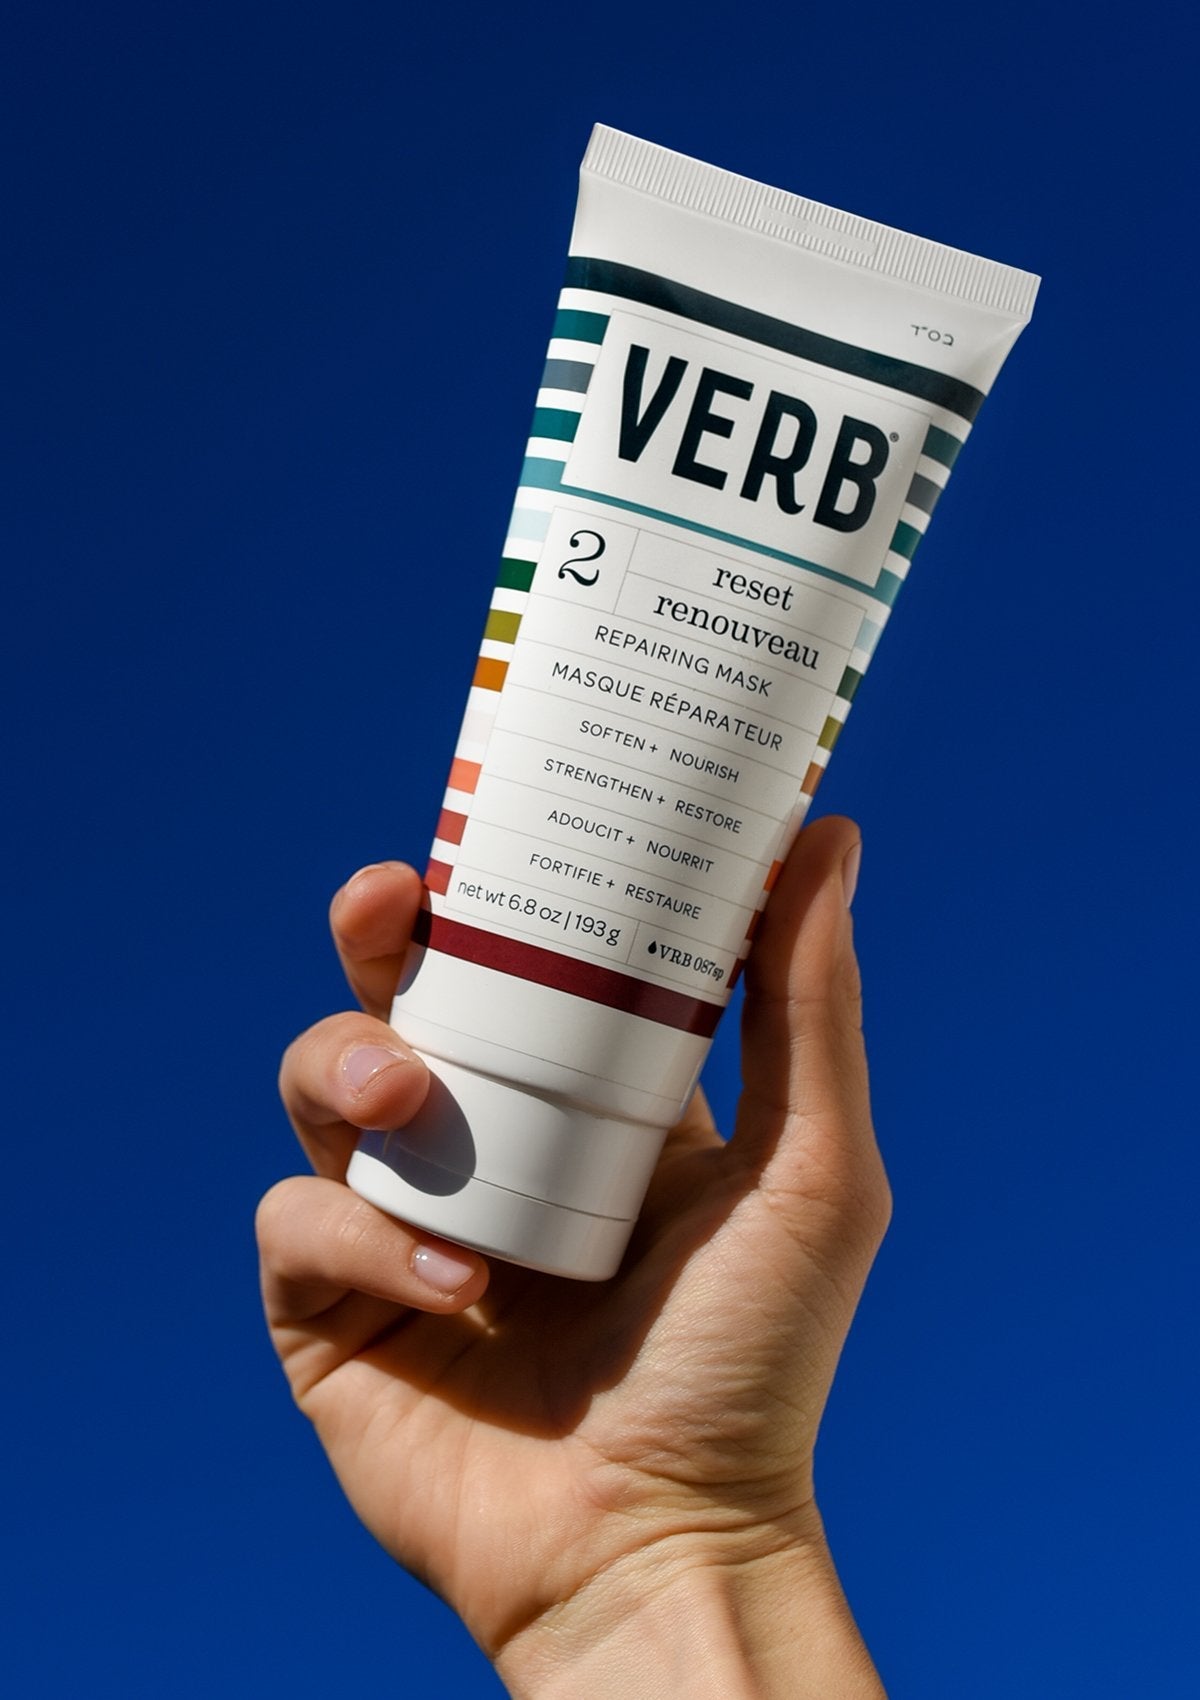 Verb - Reset repairing mask - by Verb |ProCare Outlet|